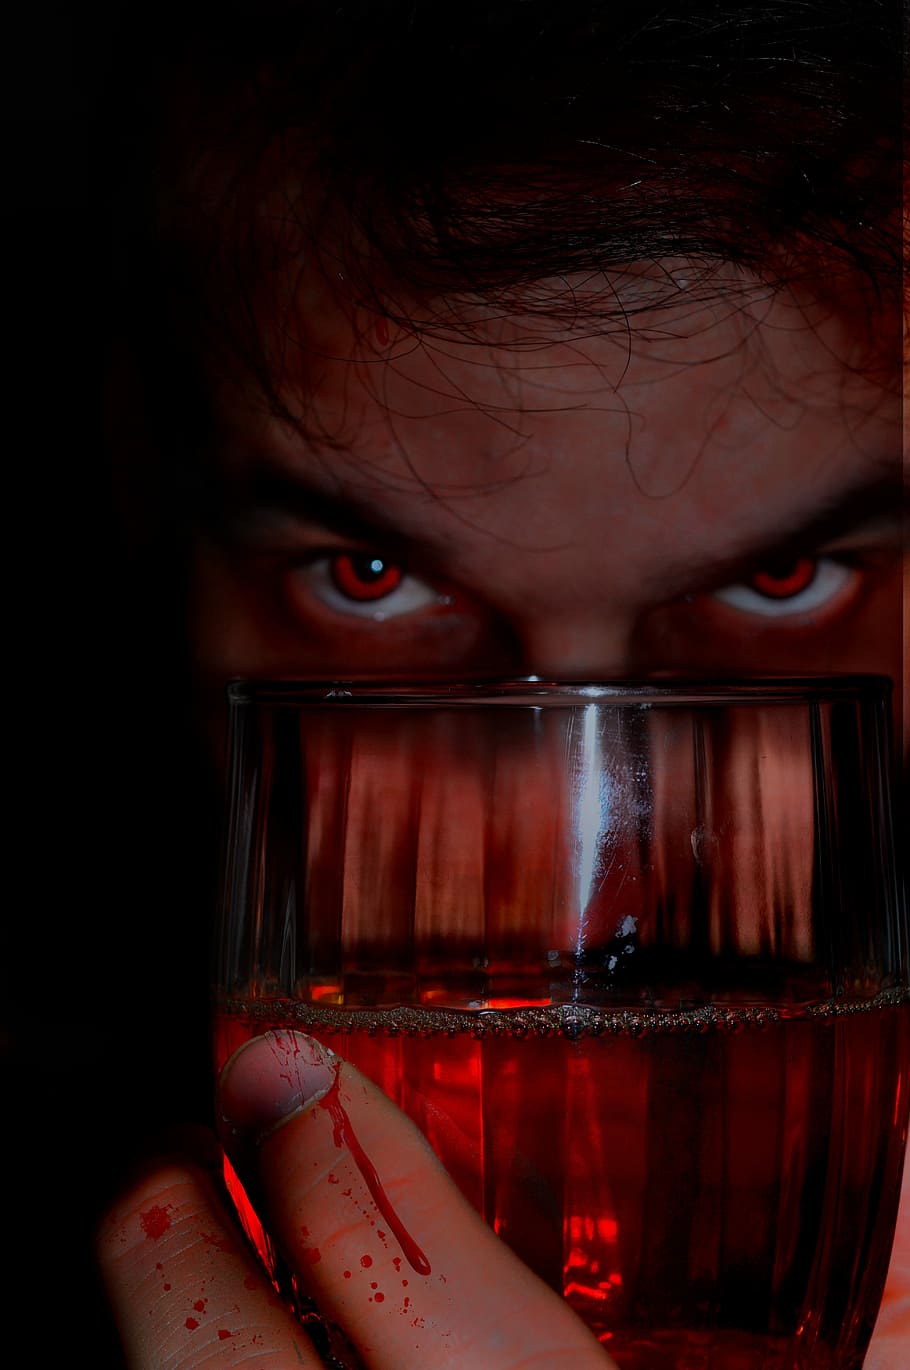 man holding clear glass wine glass, Horror, Fear, Terror, Chilling